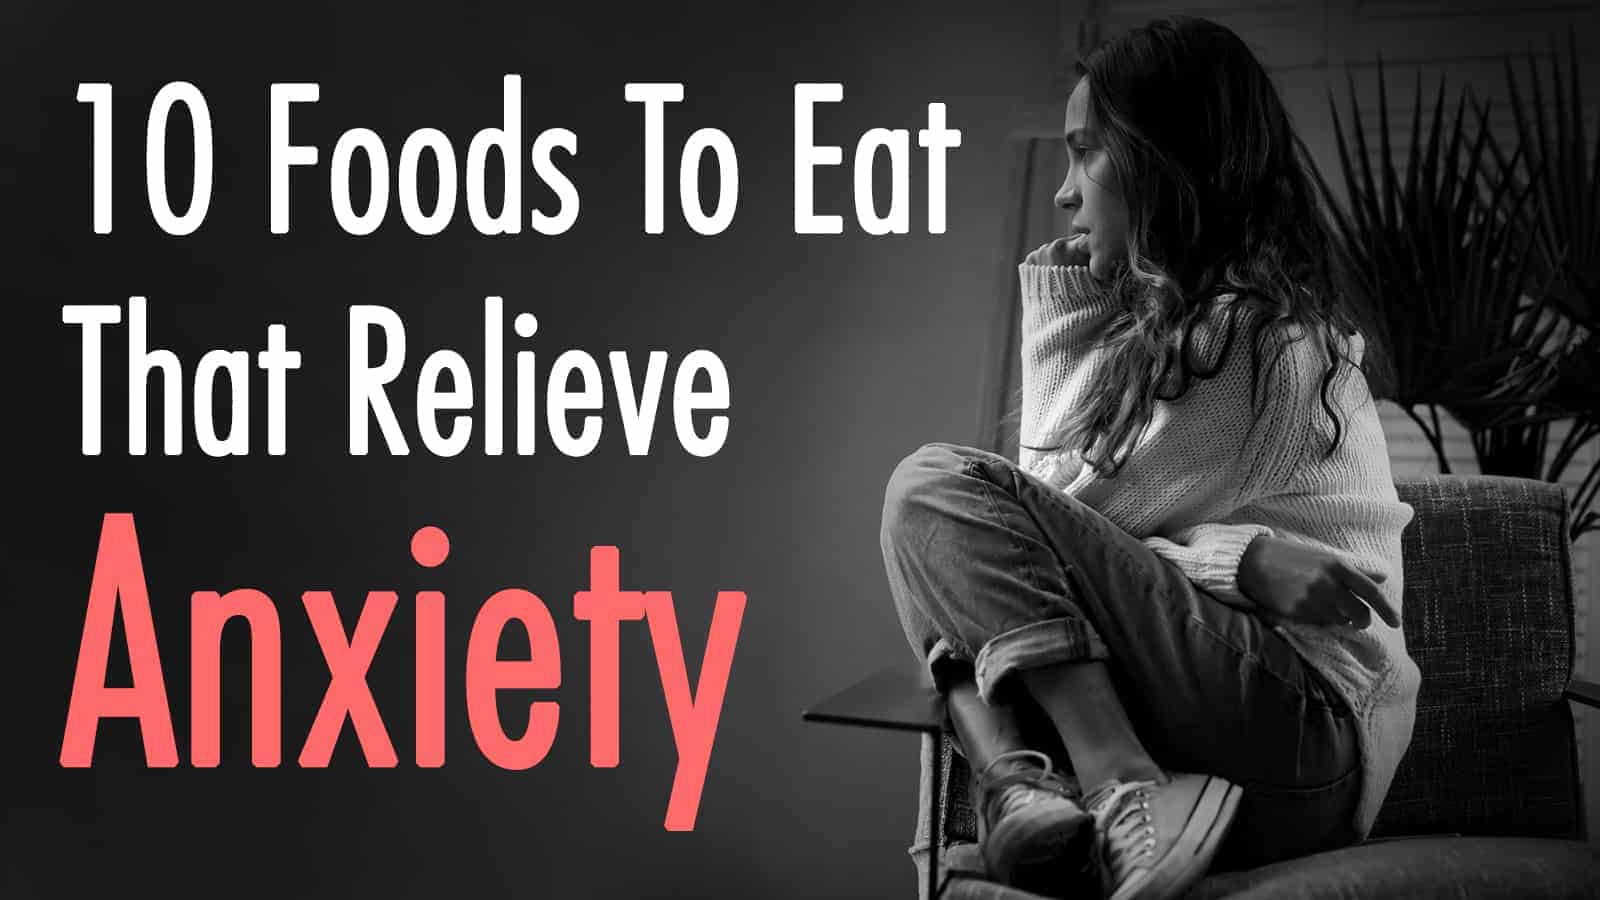 10 Foods To Eat That Relieve Anxiety